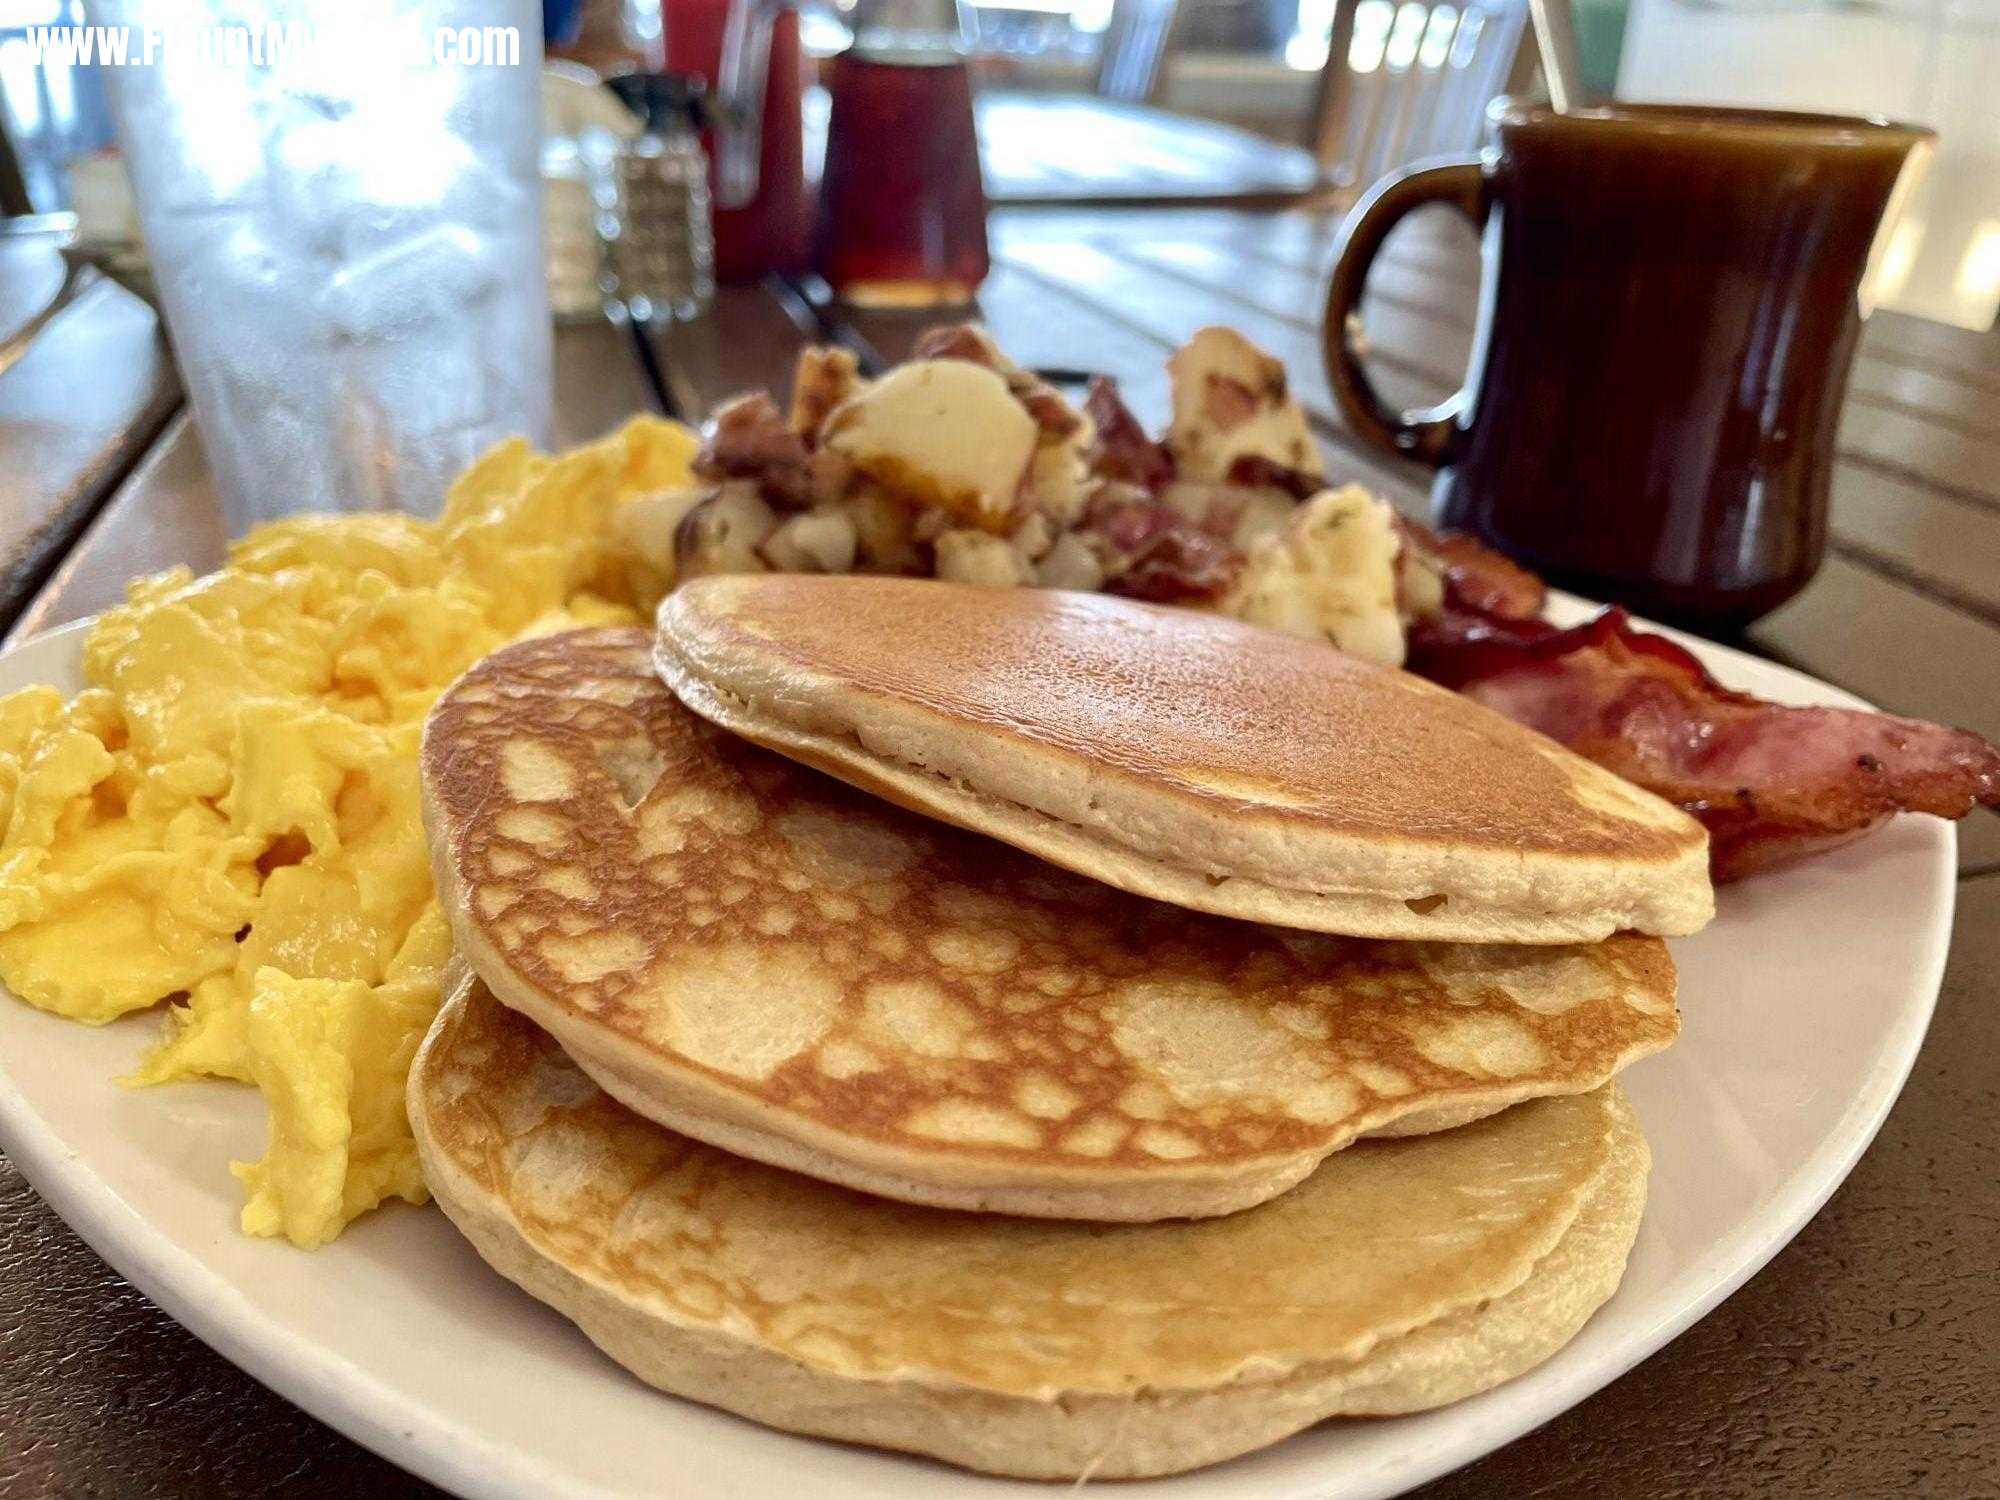 Three pancakes with two eggs home fries and bacon and coffee at Gulf Dr., Café on Anna Maria Island FloridaThree pancakes with two eggs home fries and bacon and coffee at Gulf Dr., Café on Anna Maria Island Florida